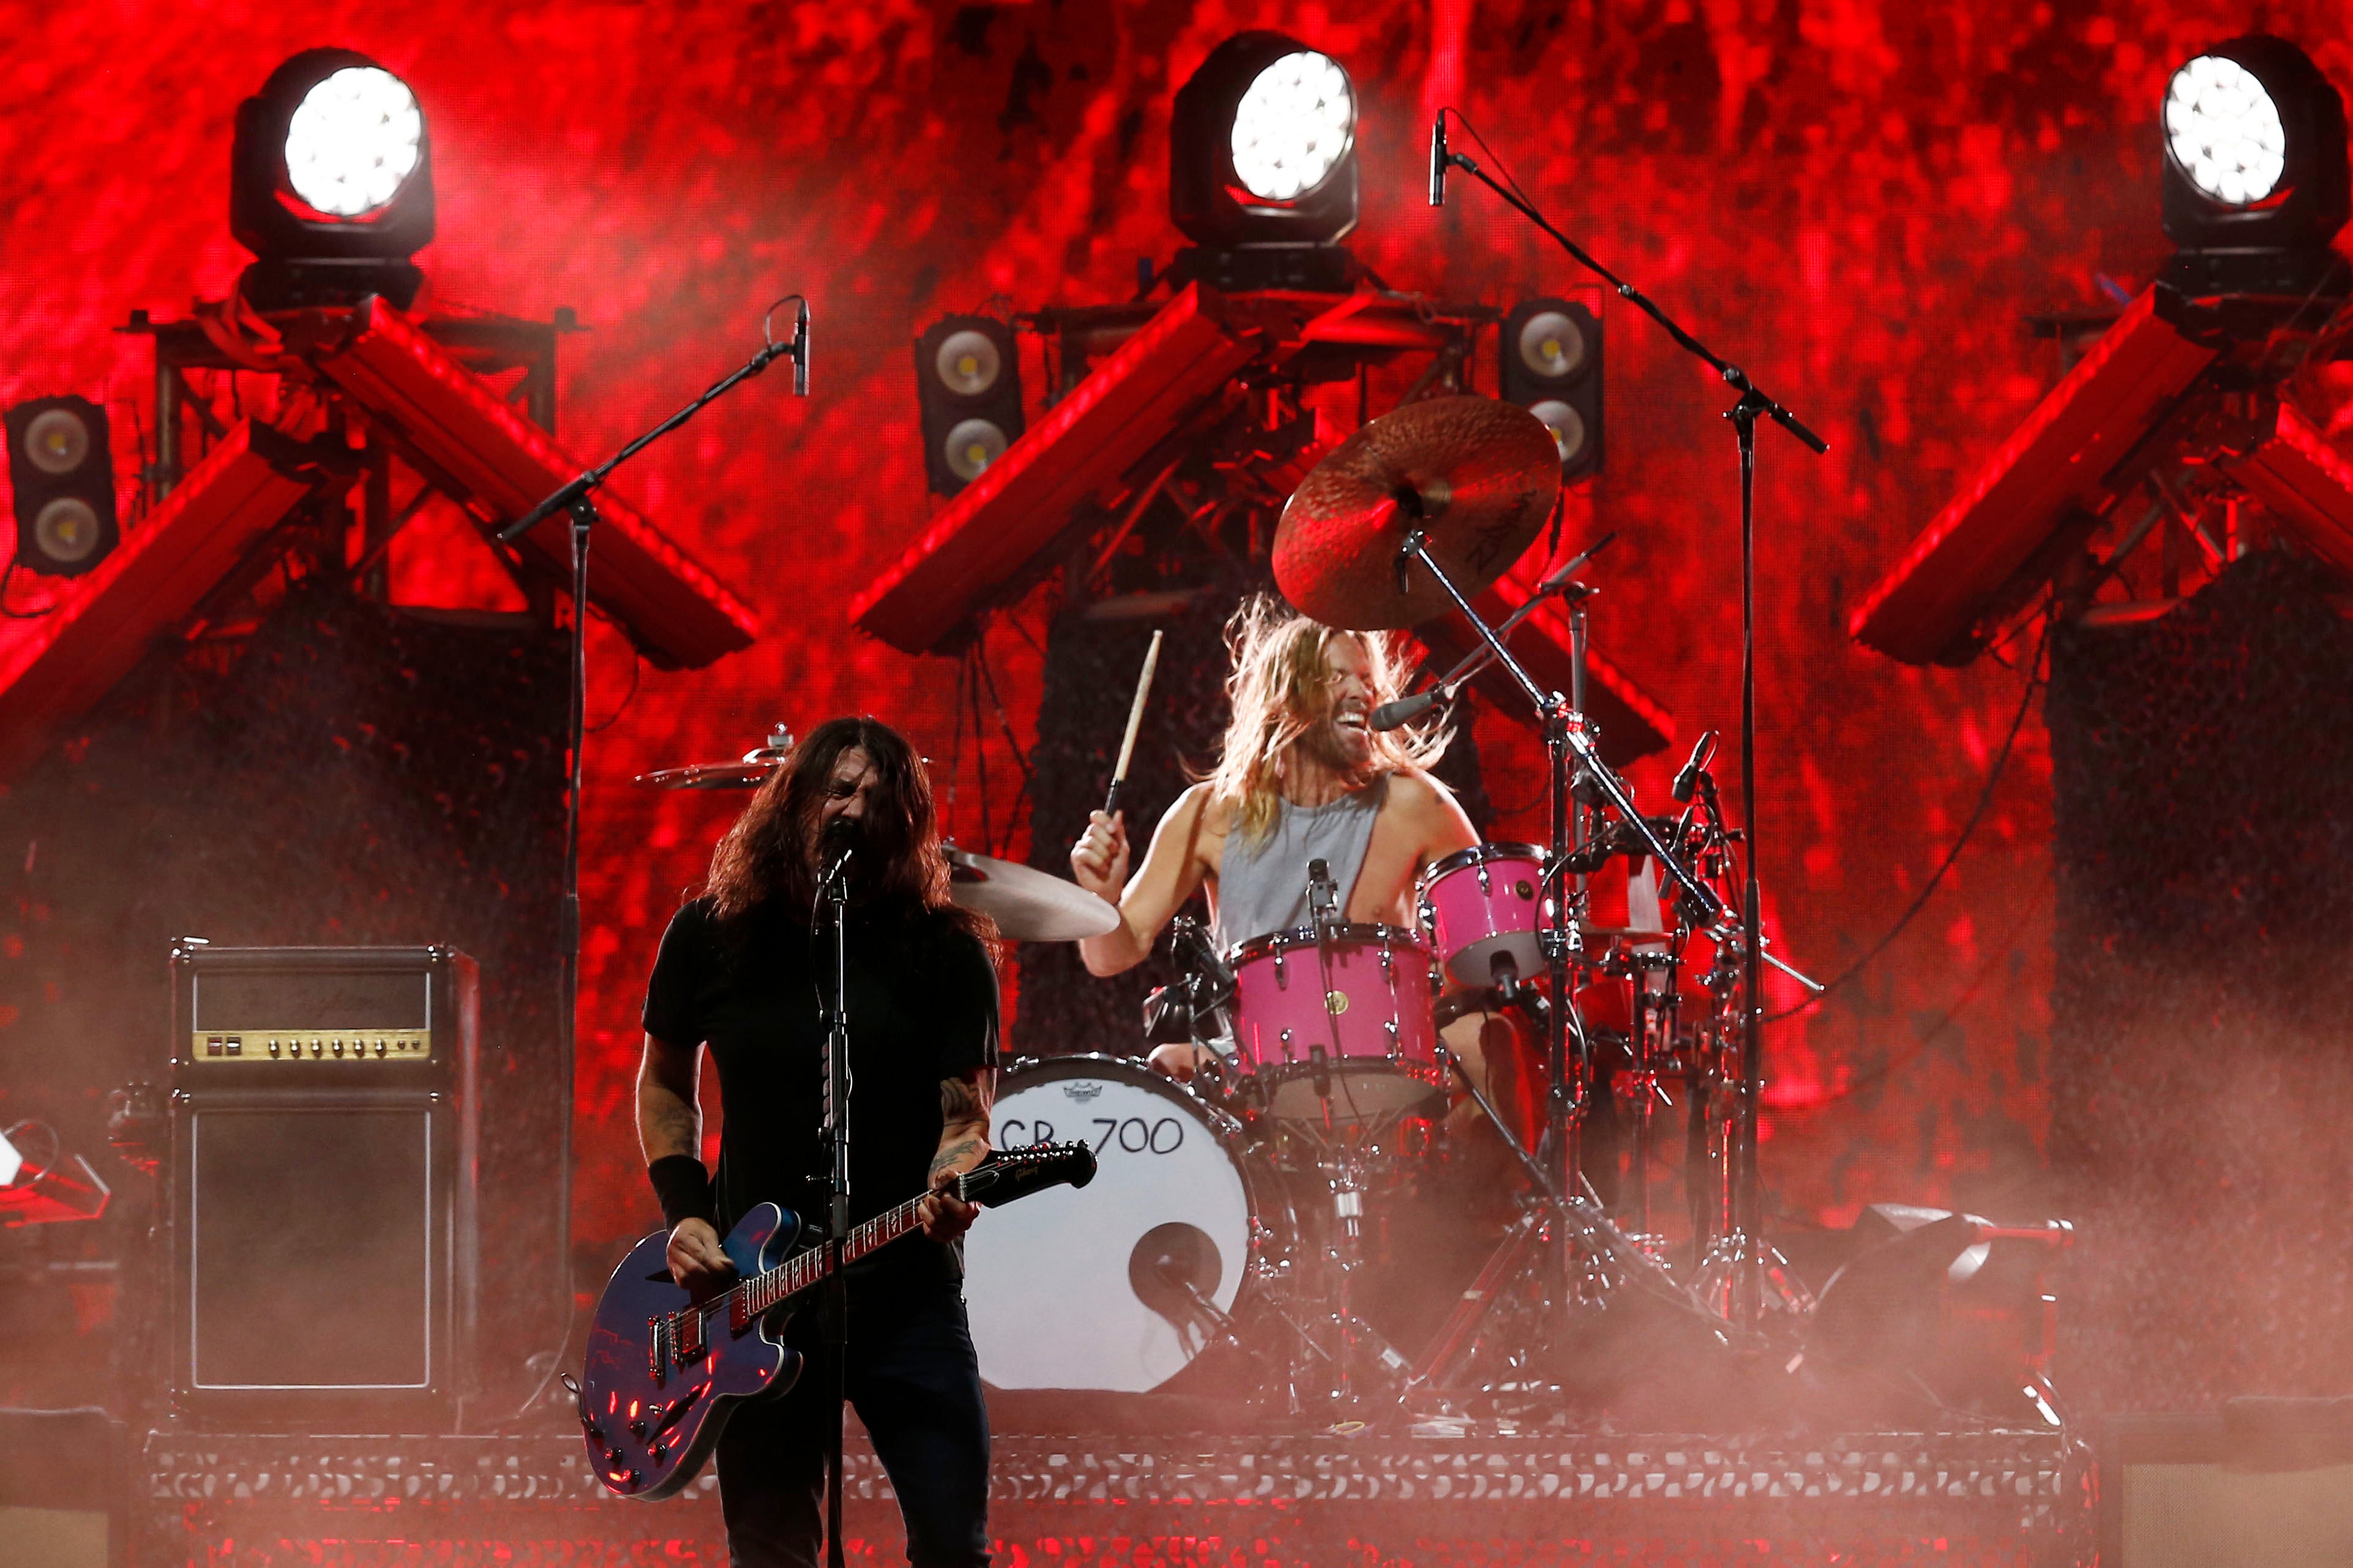 Dave Grohl and Taylor Hawkins on stage at Lollapalooza Chile last week